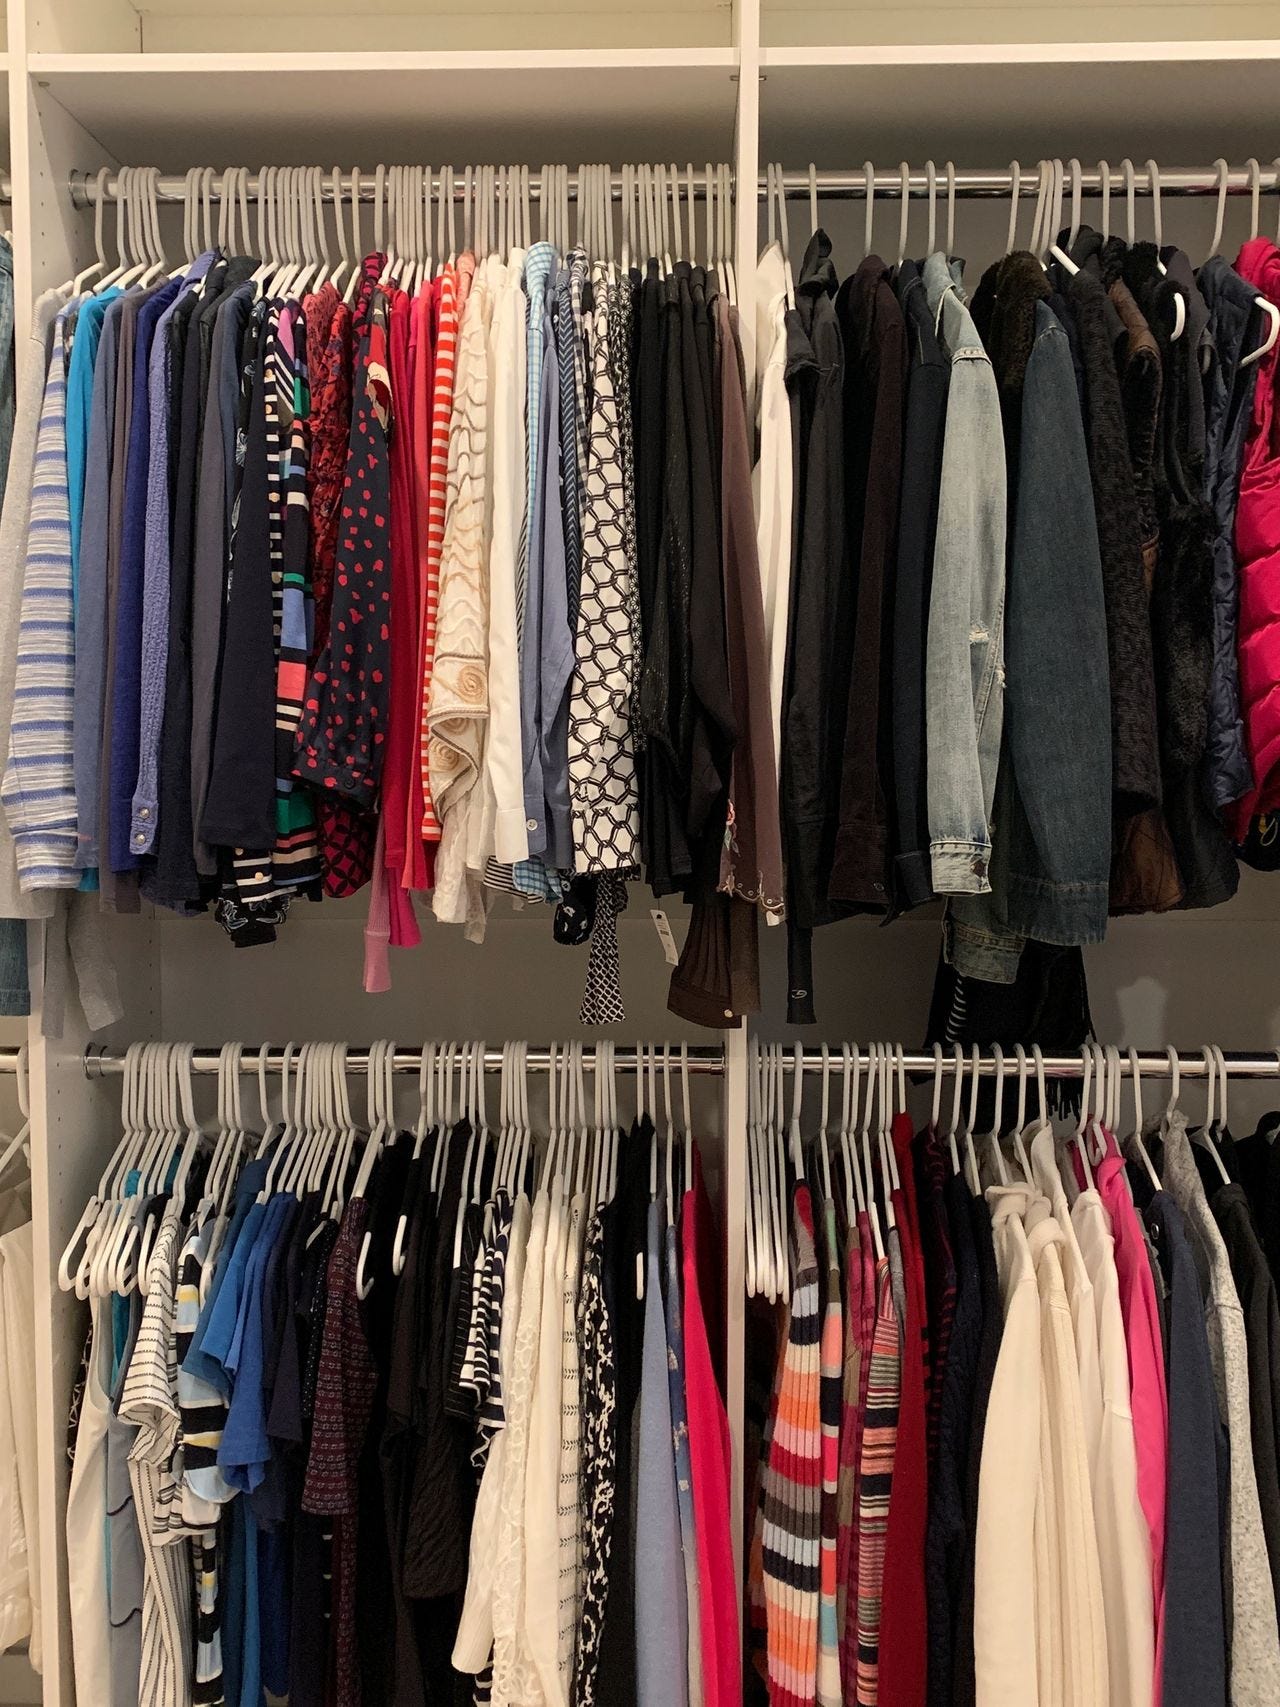 My closet after organizing and shopping